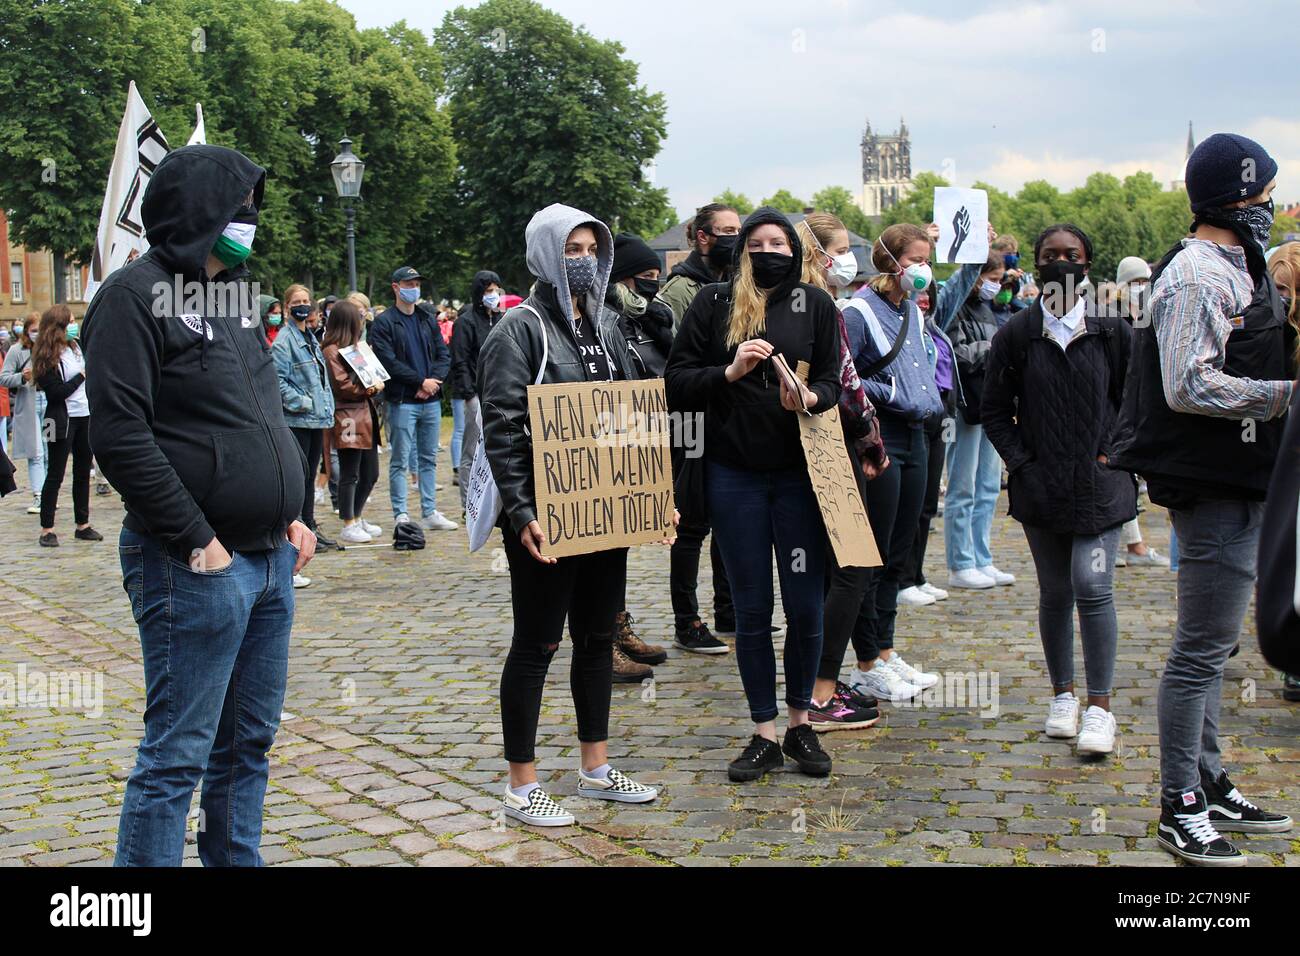 Peaceful Black Lives Matter Protest on Schlossplatz. Protest in response to George Floyd's death and police violence against black people. Stock Photo